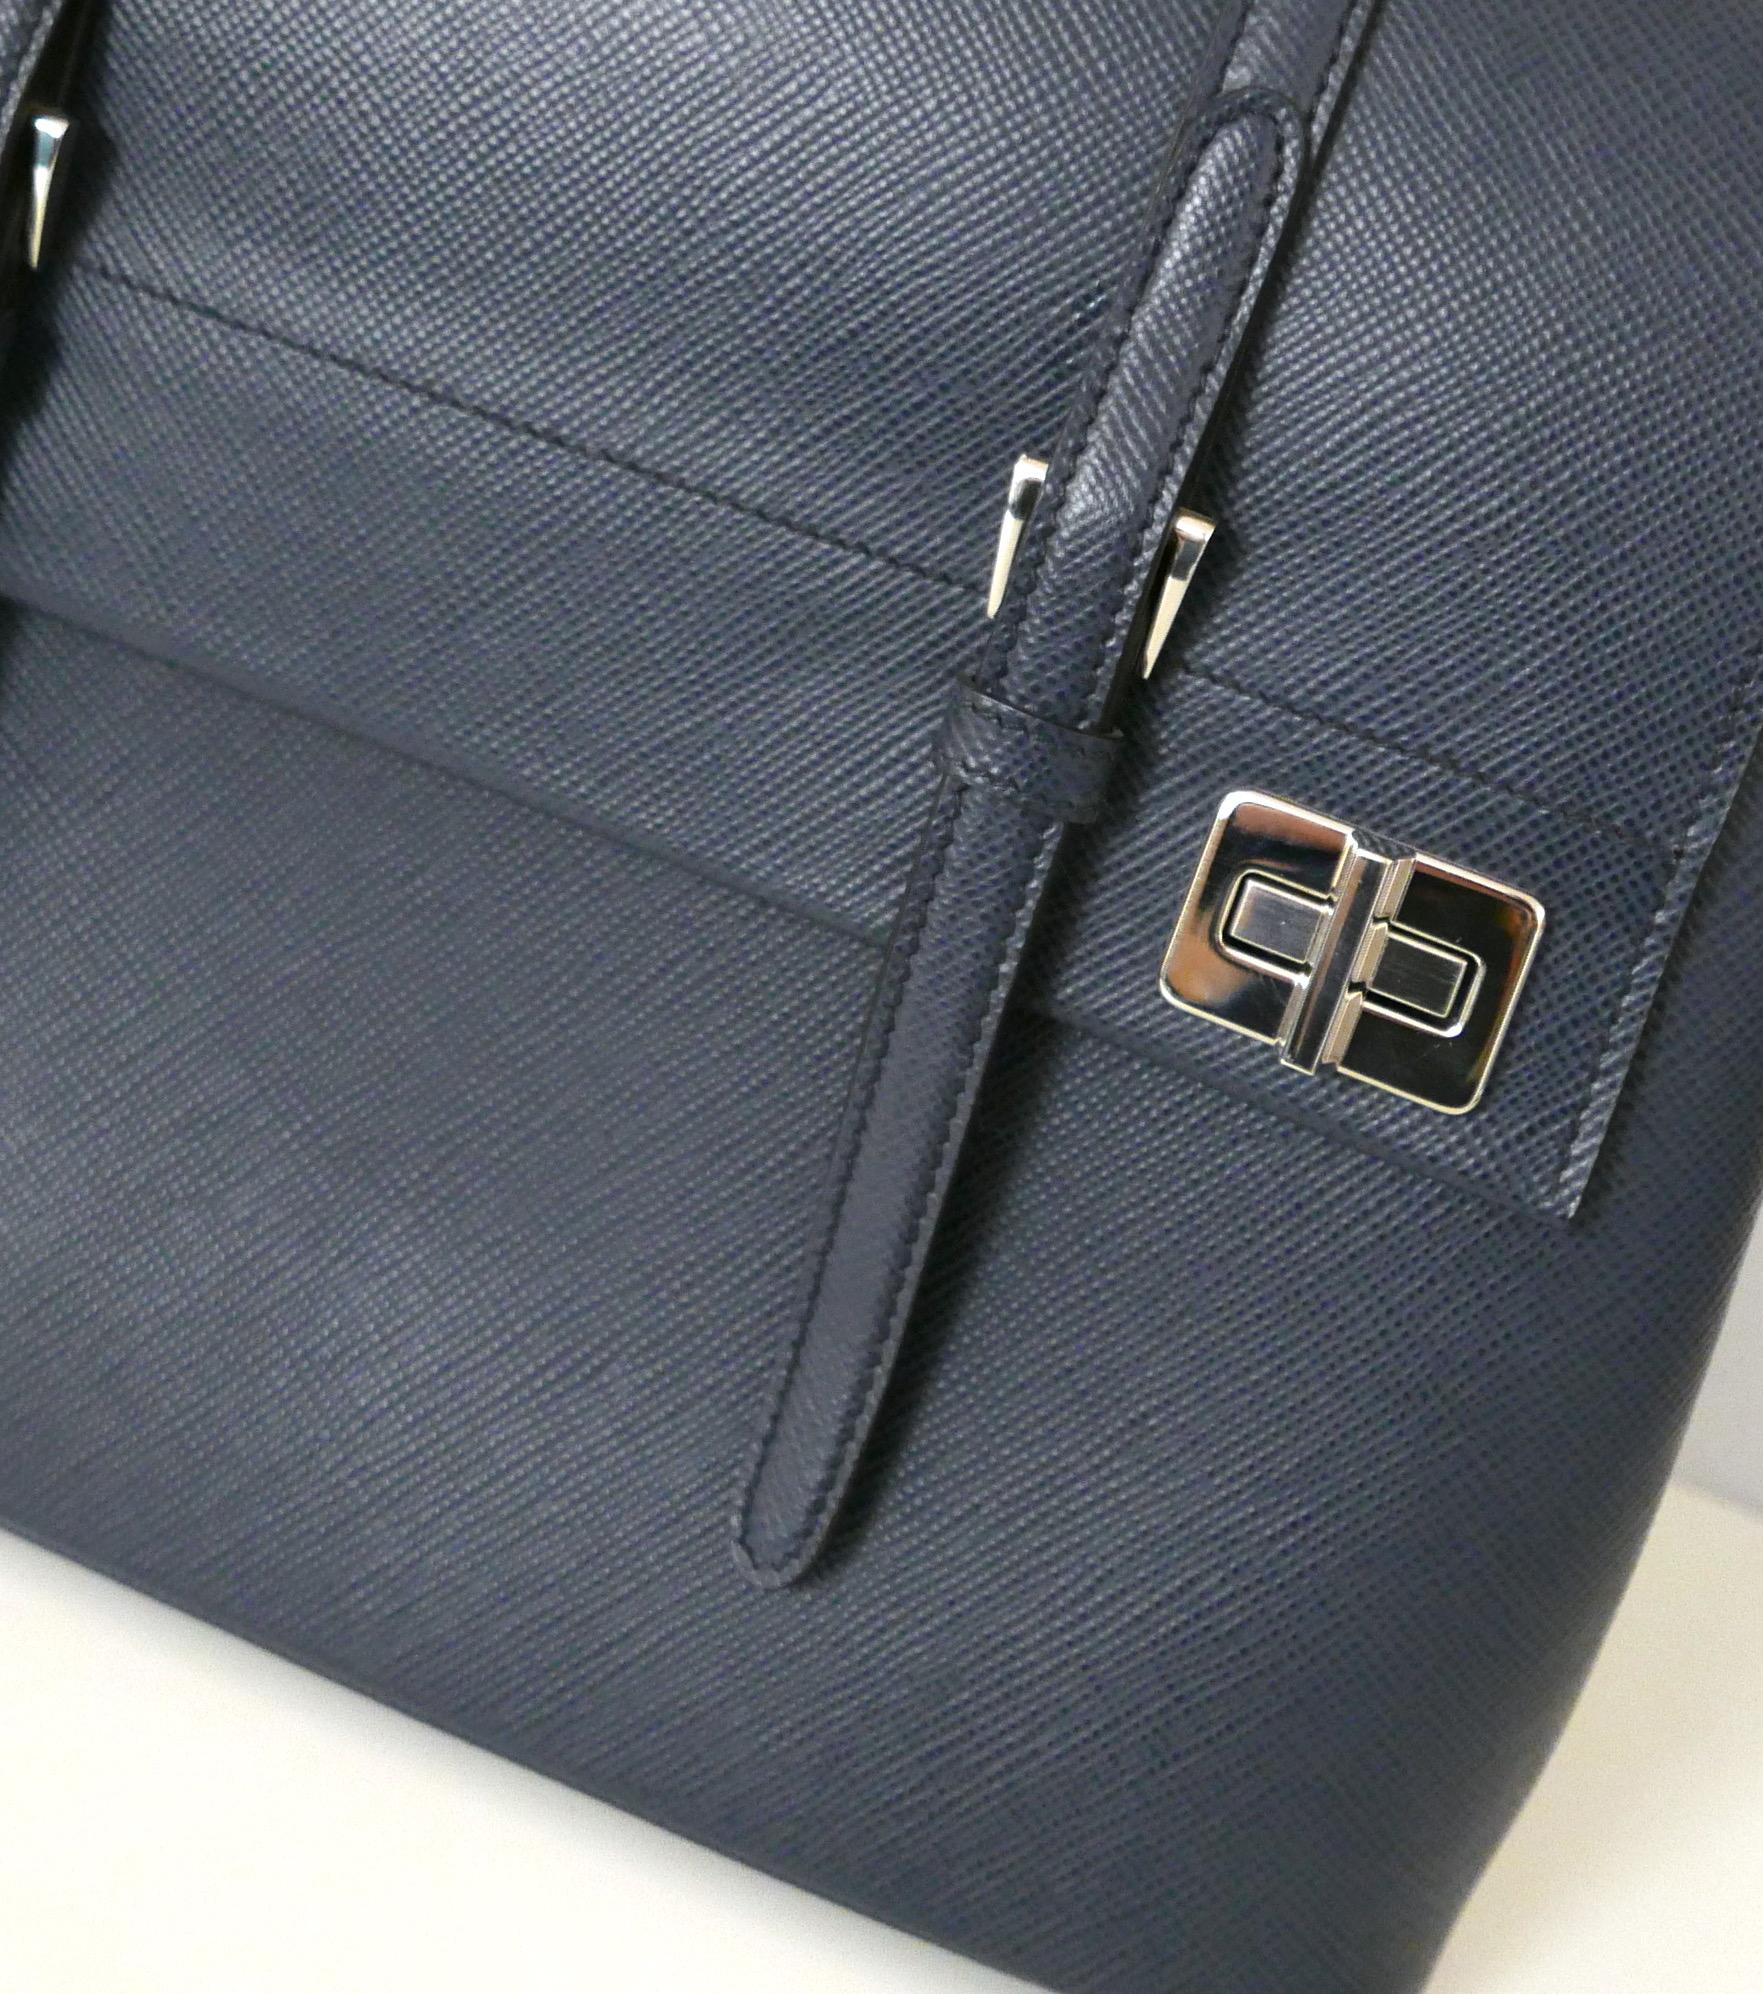 Stunning Prada BN2789 Double Satchel bag from the AW14 collection. 

Bought from Harrods for around £2200 and is brand new with authenticity card, care information, dust bag and shoulder strap which has not been unwrapped and comes in its own little